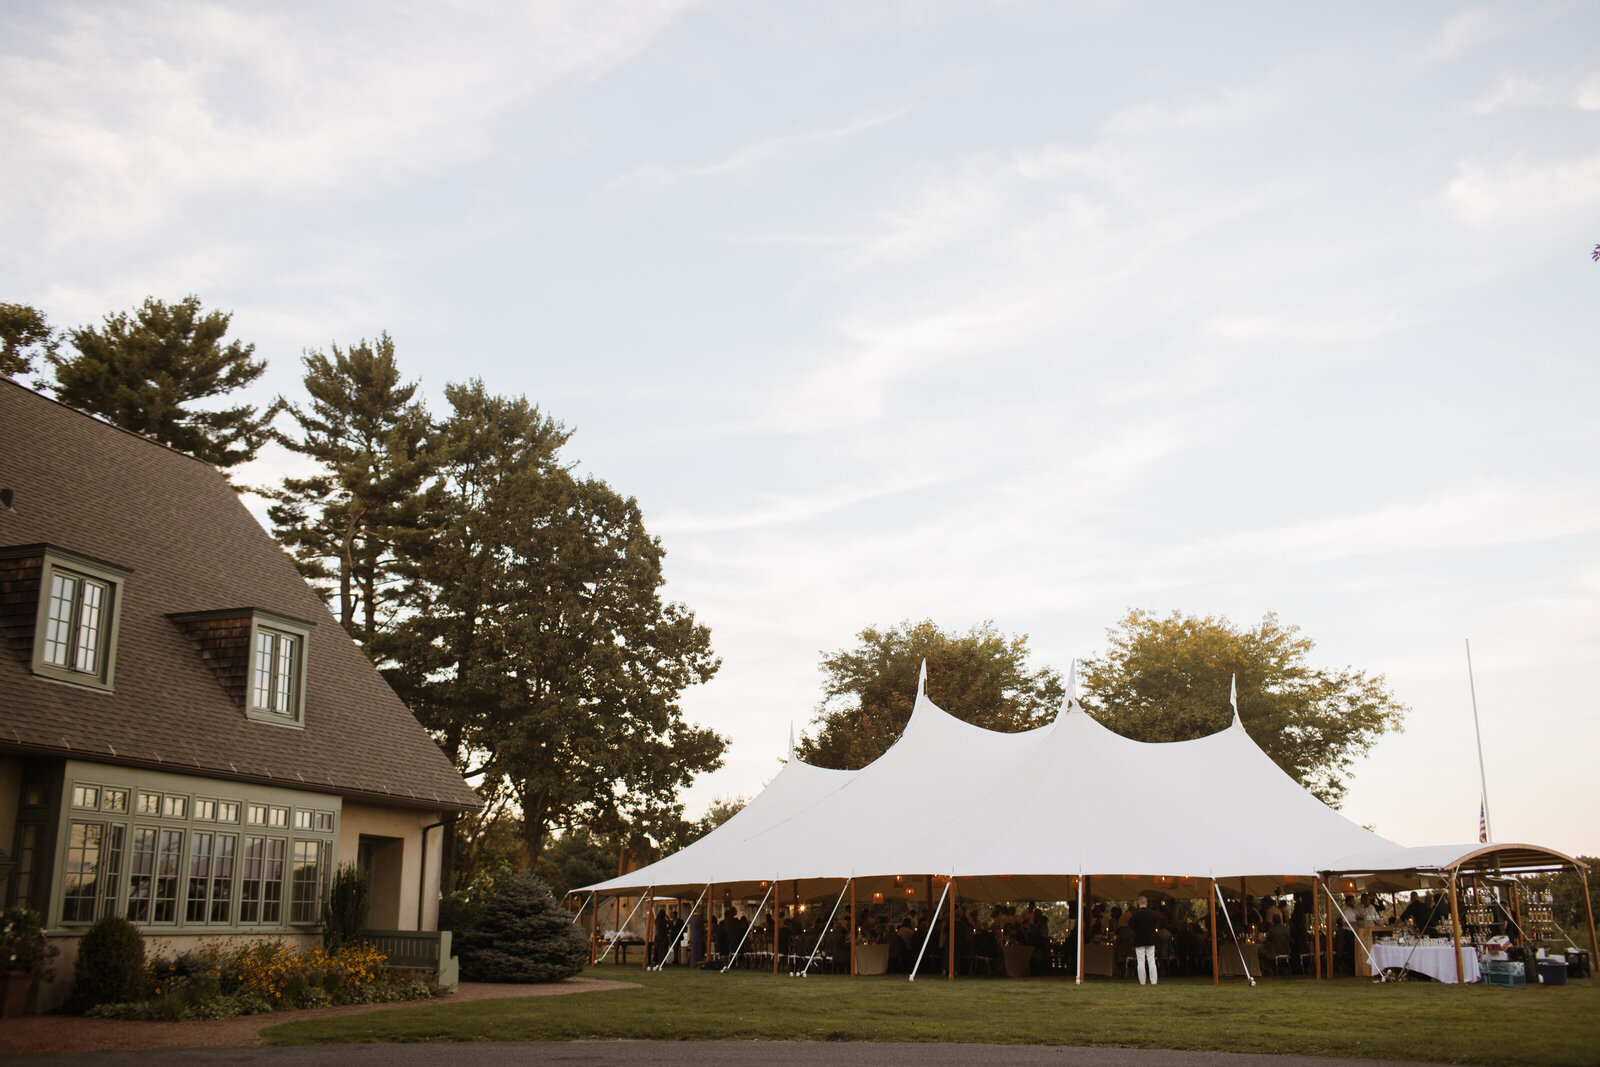 jubilee_events_tented_wedding_fall_155